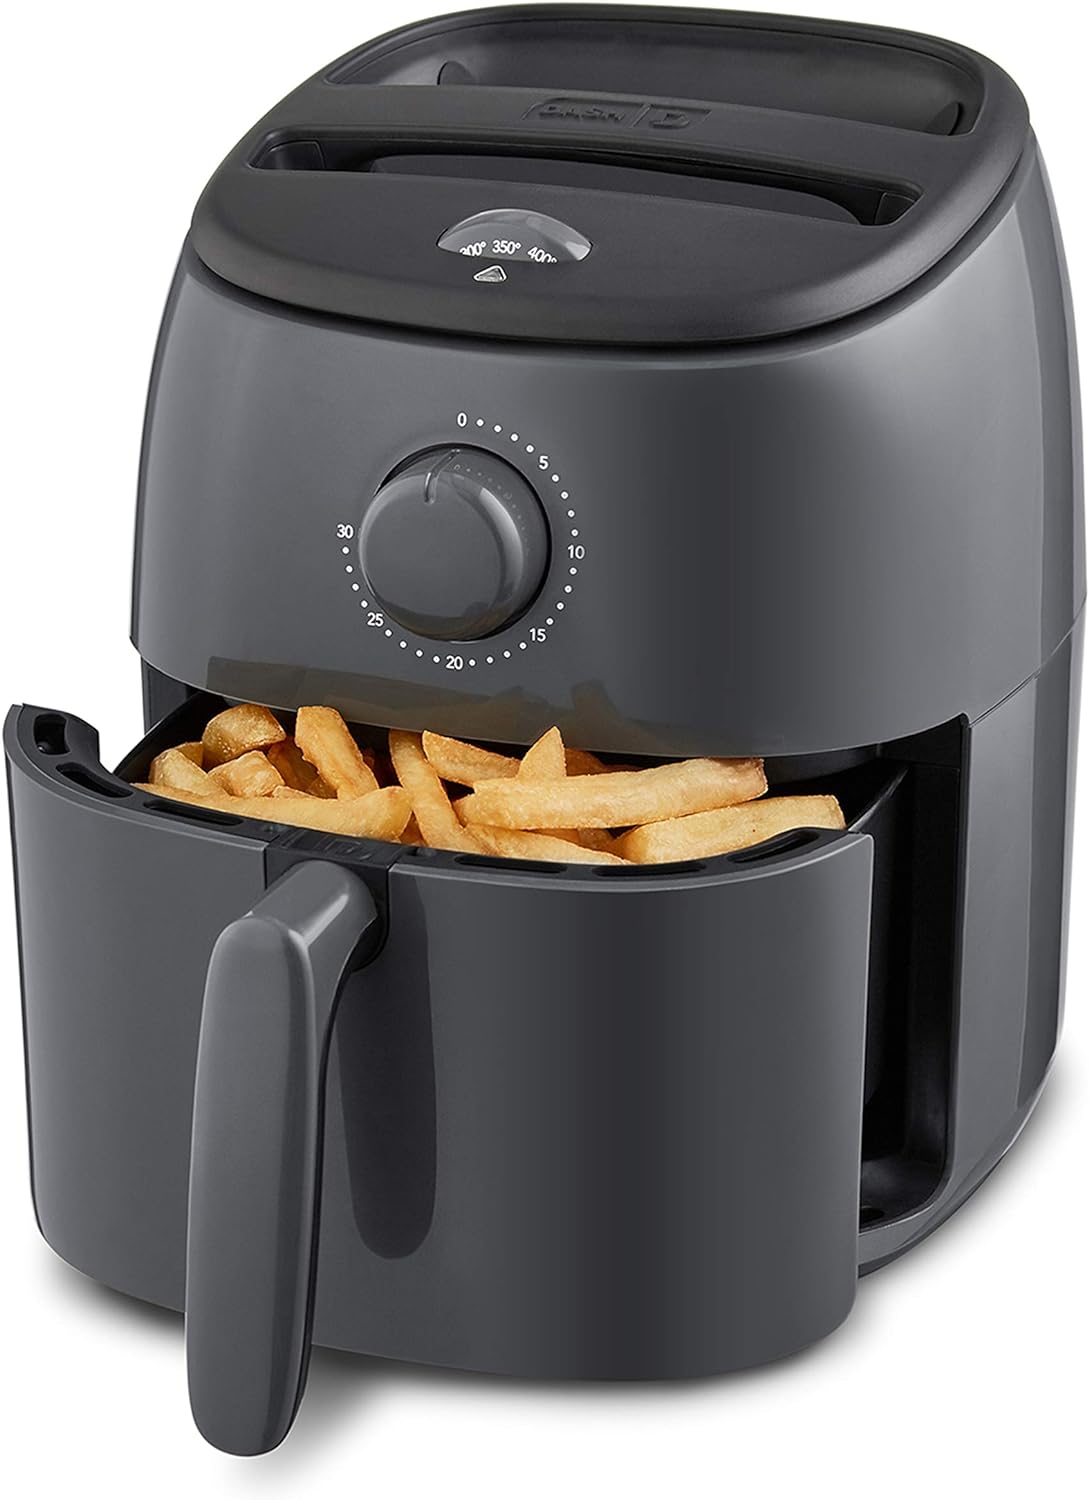 DASH Tasti-Crisp™ Electric Air Fryer Oven, 2.6 Qt., Grey – Compact Air Fryer for Healthier Food in Minutes, Ideal for Small Spaces - Auto Shut Off, Analog, 1000-Watt